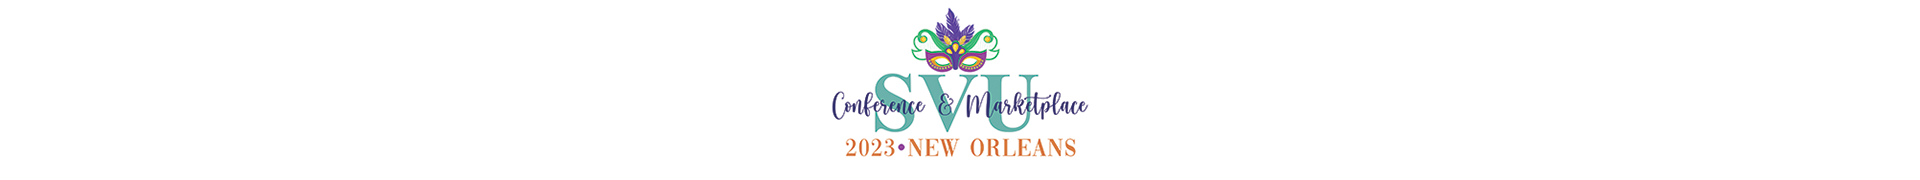 SVU 2023 Annual Conference & Marketplace Event Banner